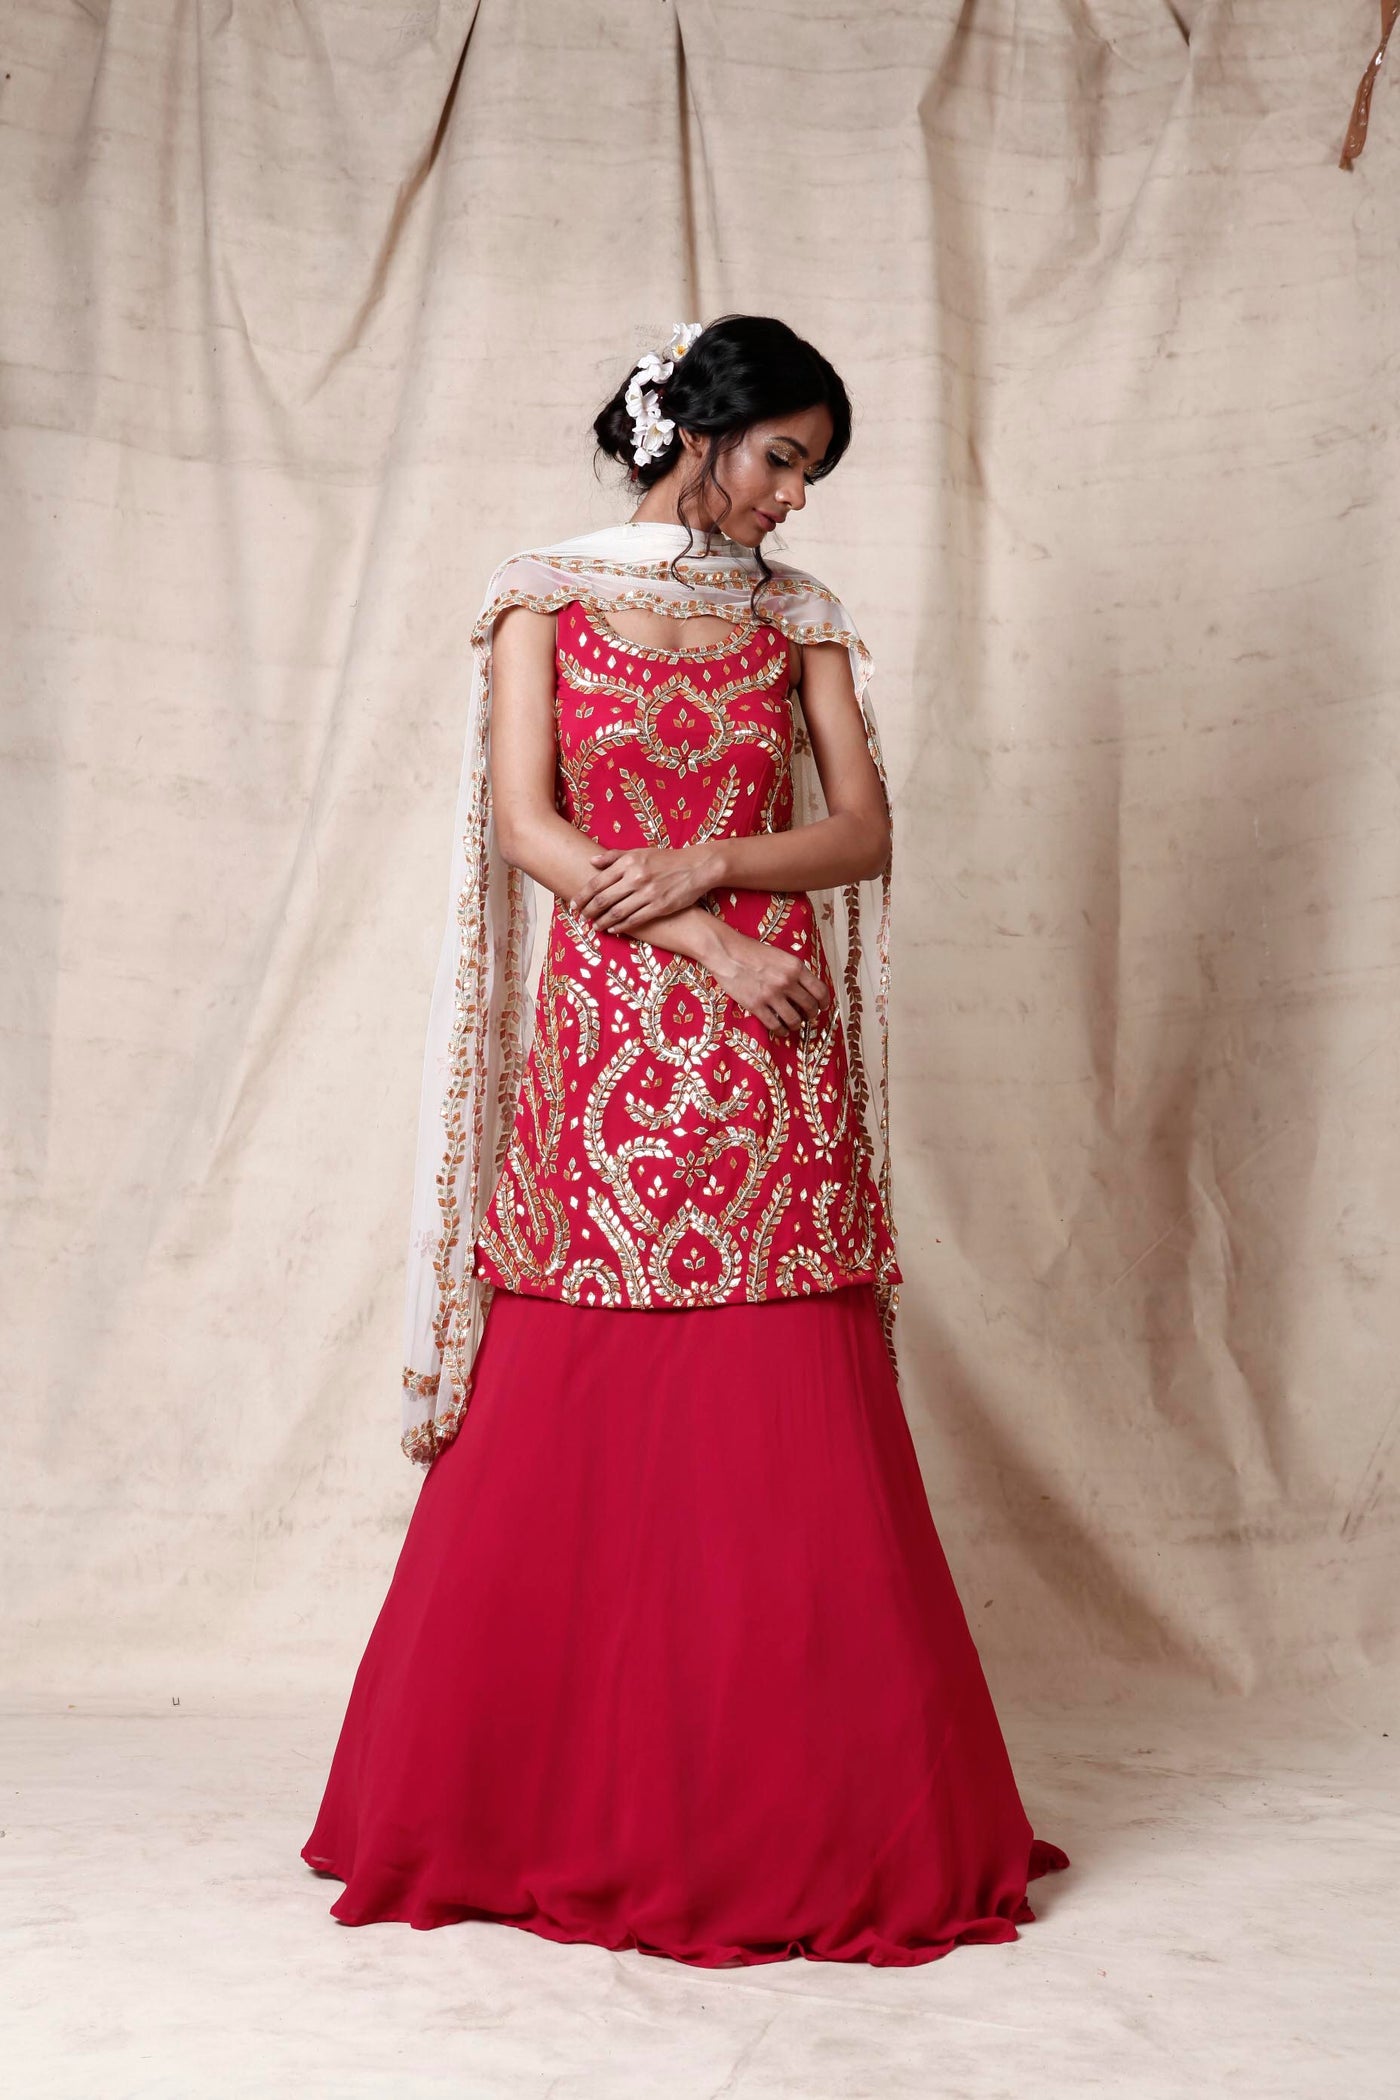 Magenta Lehenga Set - Indian Clothing in Denver, CO, Aurora, CO, Boulder, CO, Fort Collins, CO, Colorado Springs, CO, Parker, CO, Highlands Ranch, CO, Cherry Creek, CO, Centennial, CO, and Longmont, CO. Nationwide shipping USA - India Fashion X